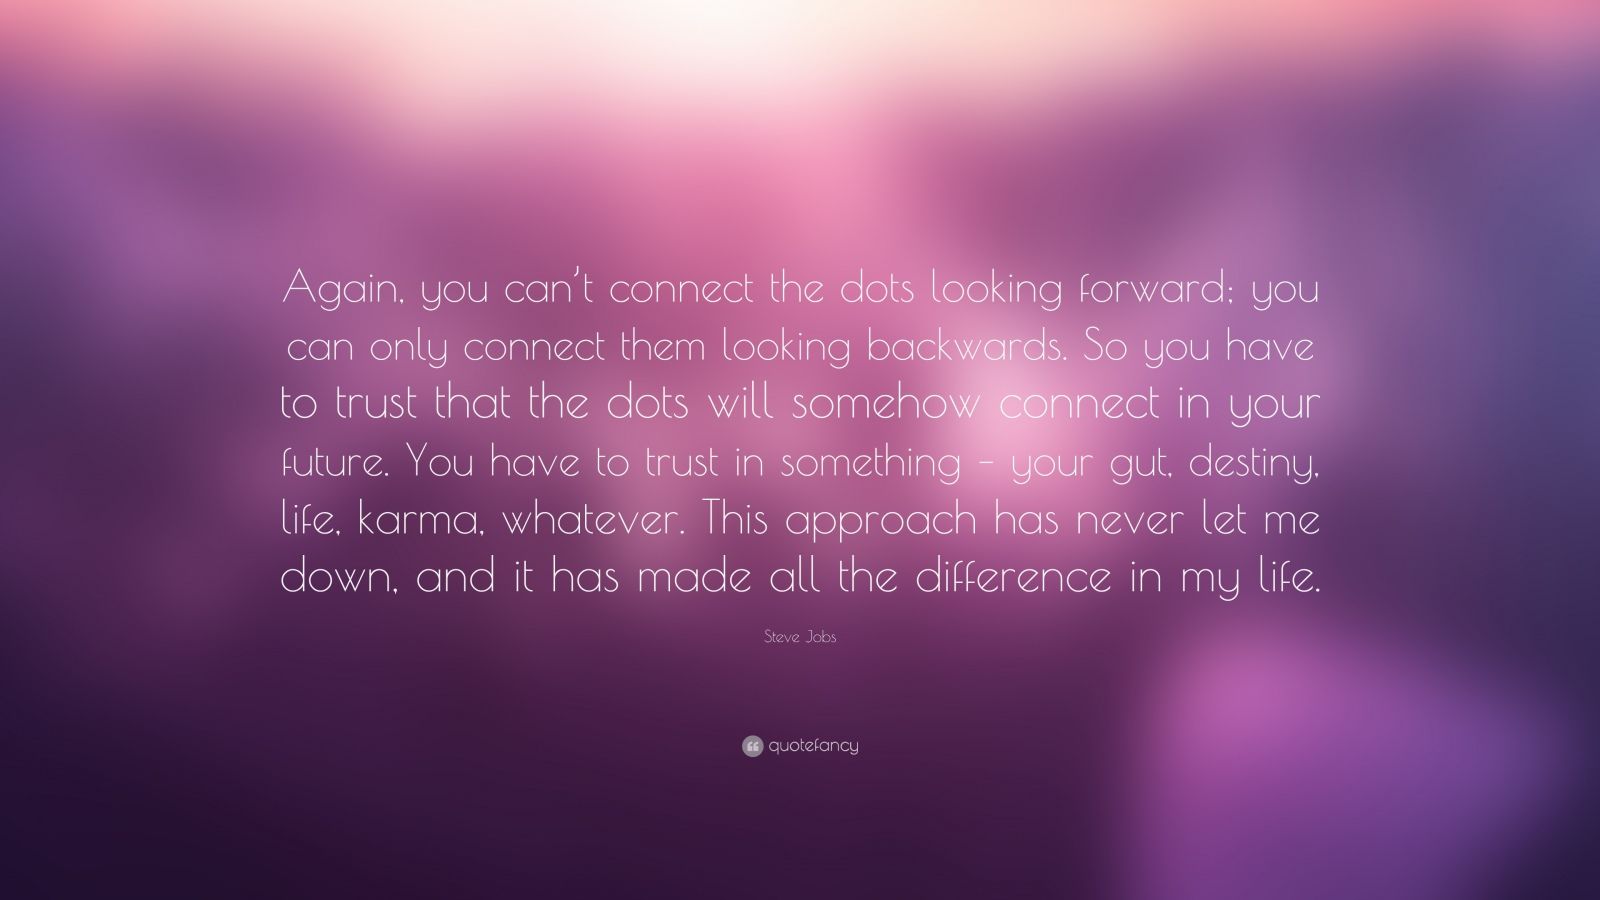 Steve Jobs Quote: “Again, you can’t connect the dots looking forward ...